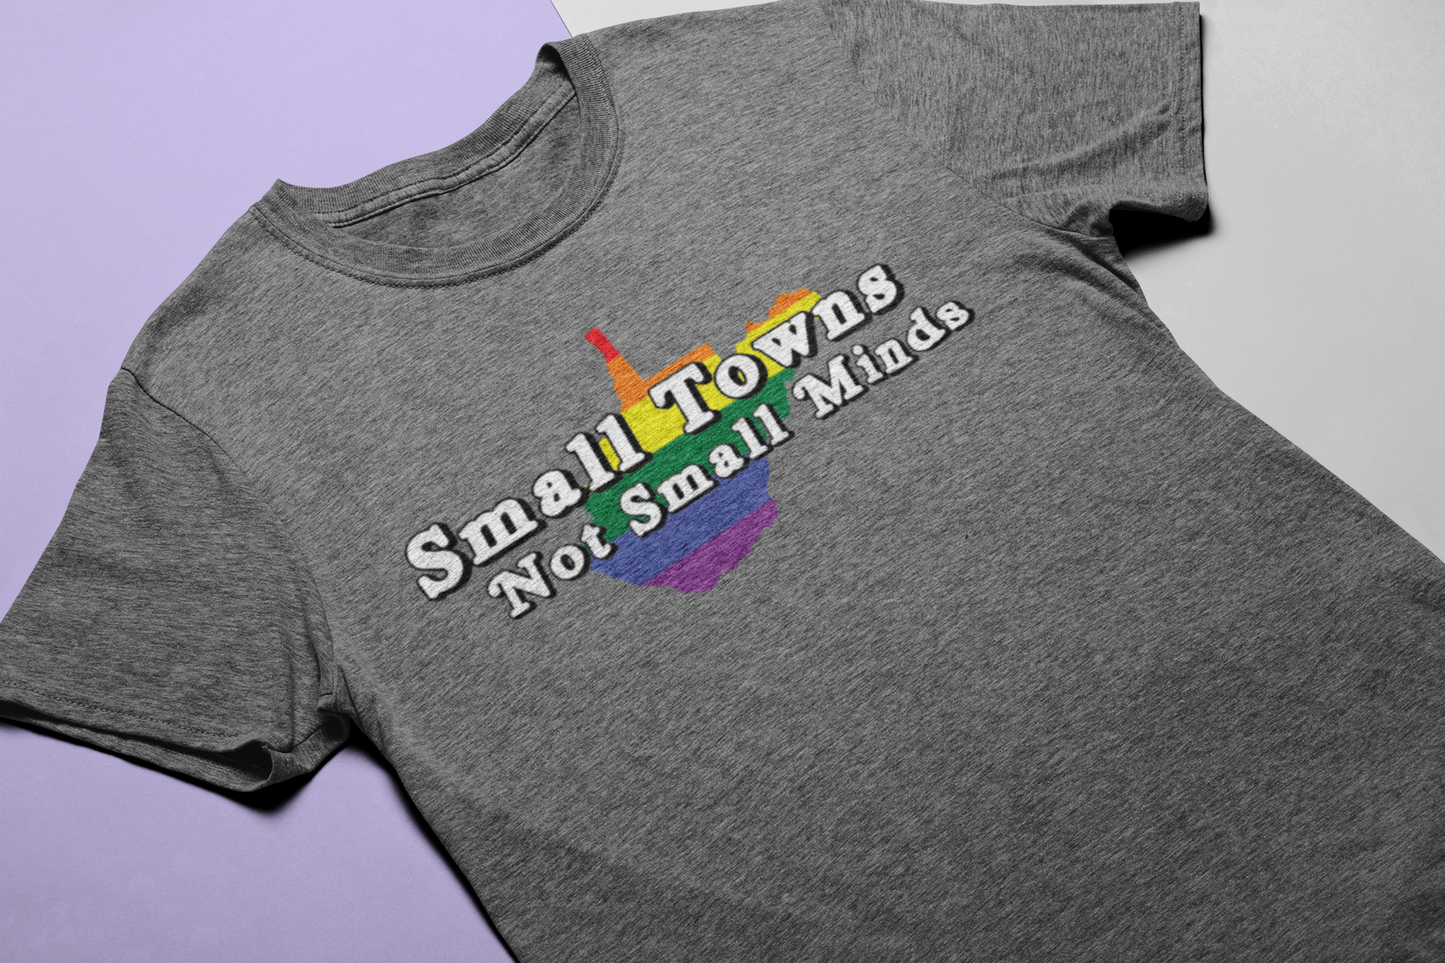 Small Towns Not Small Minds Shirt